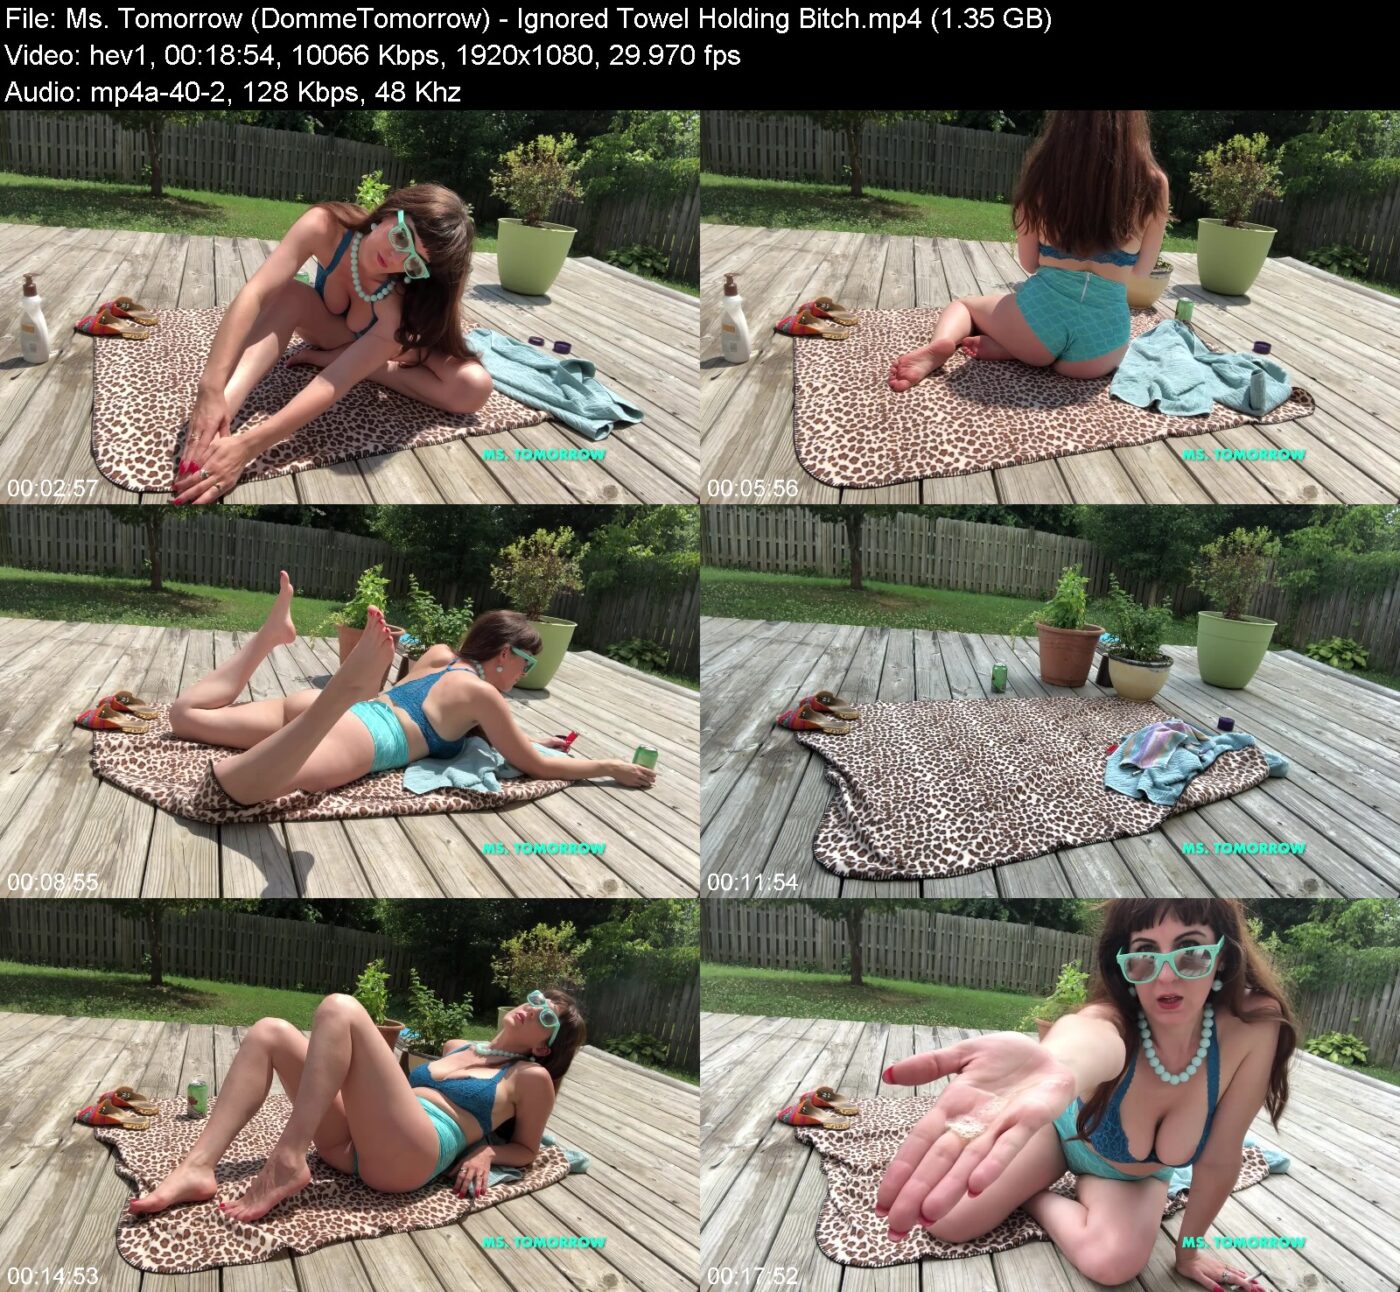 Ms. Tomorrow (DommeTomorrow) - Ignored Towel Holding Bitch